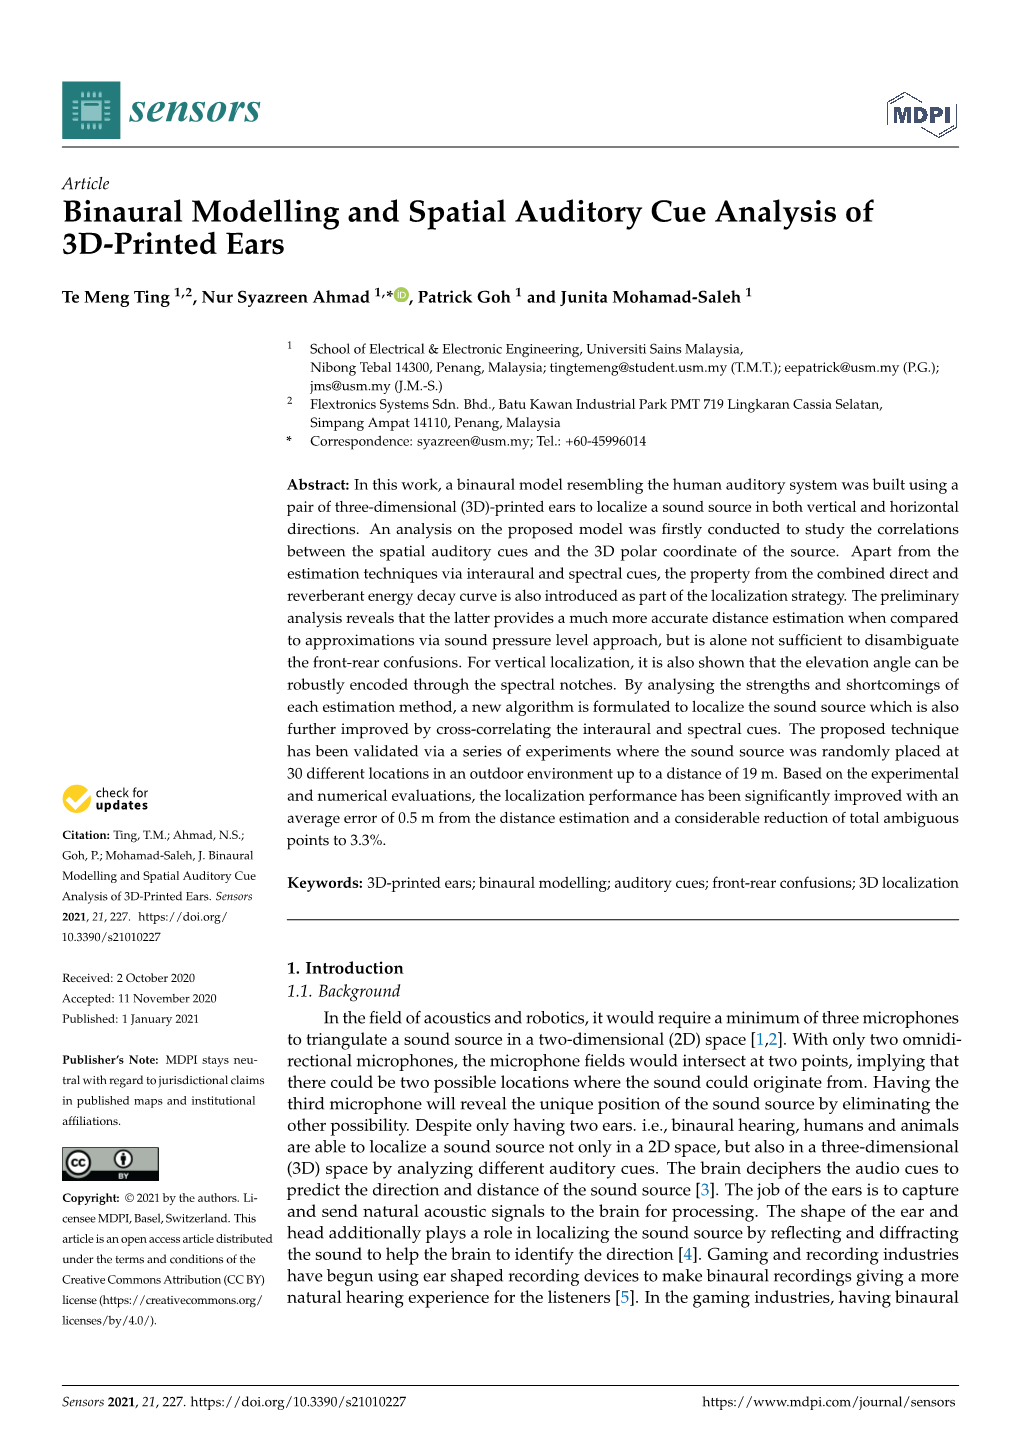 Binaural Modelling and Spatial Auditory Cue Analysis of 3D-Printed Ears